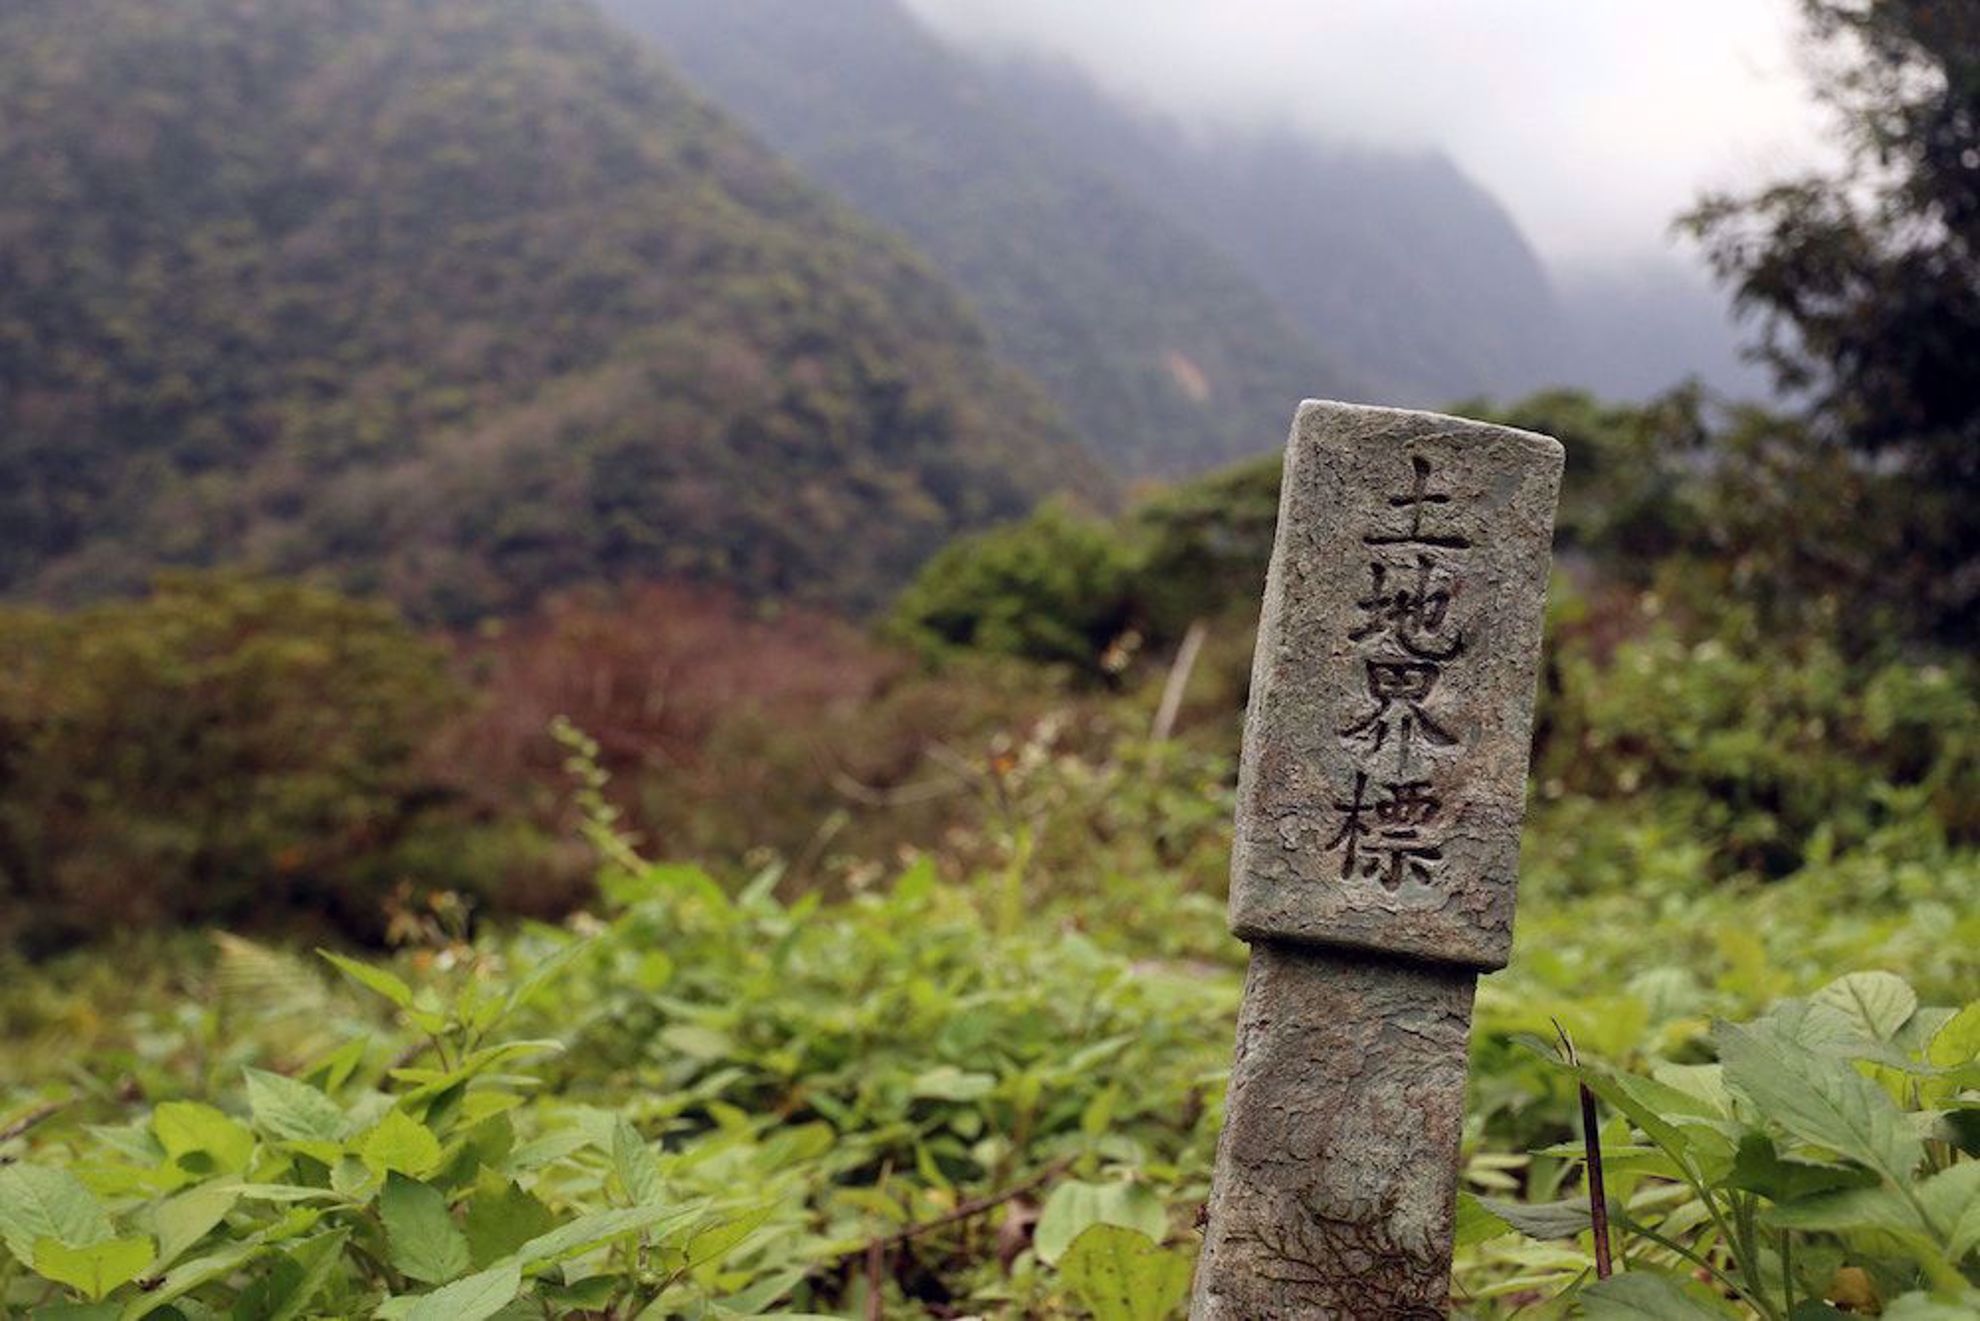 Gorge in Taiwan with sign post